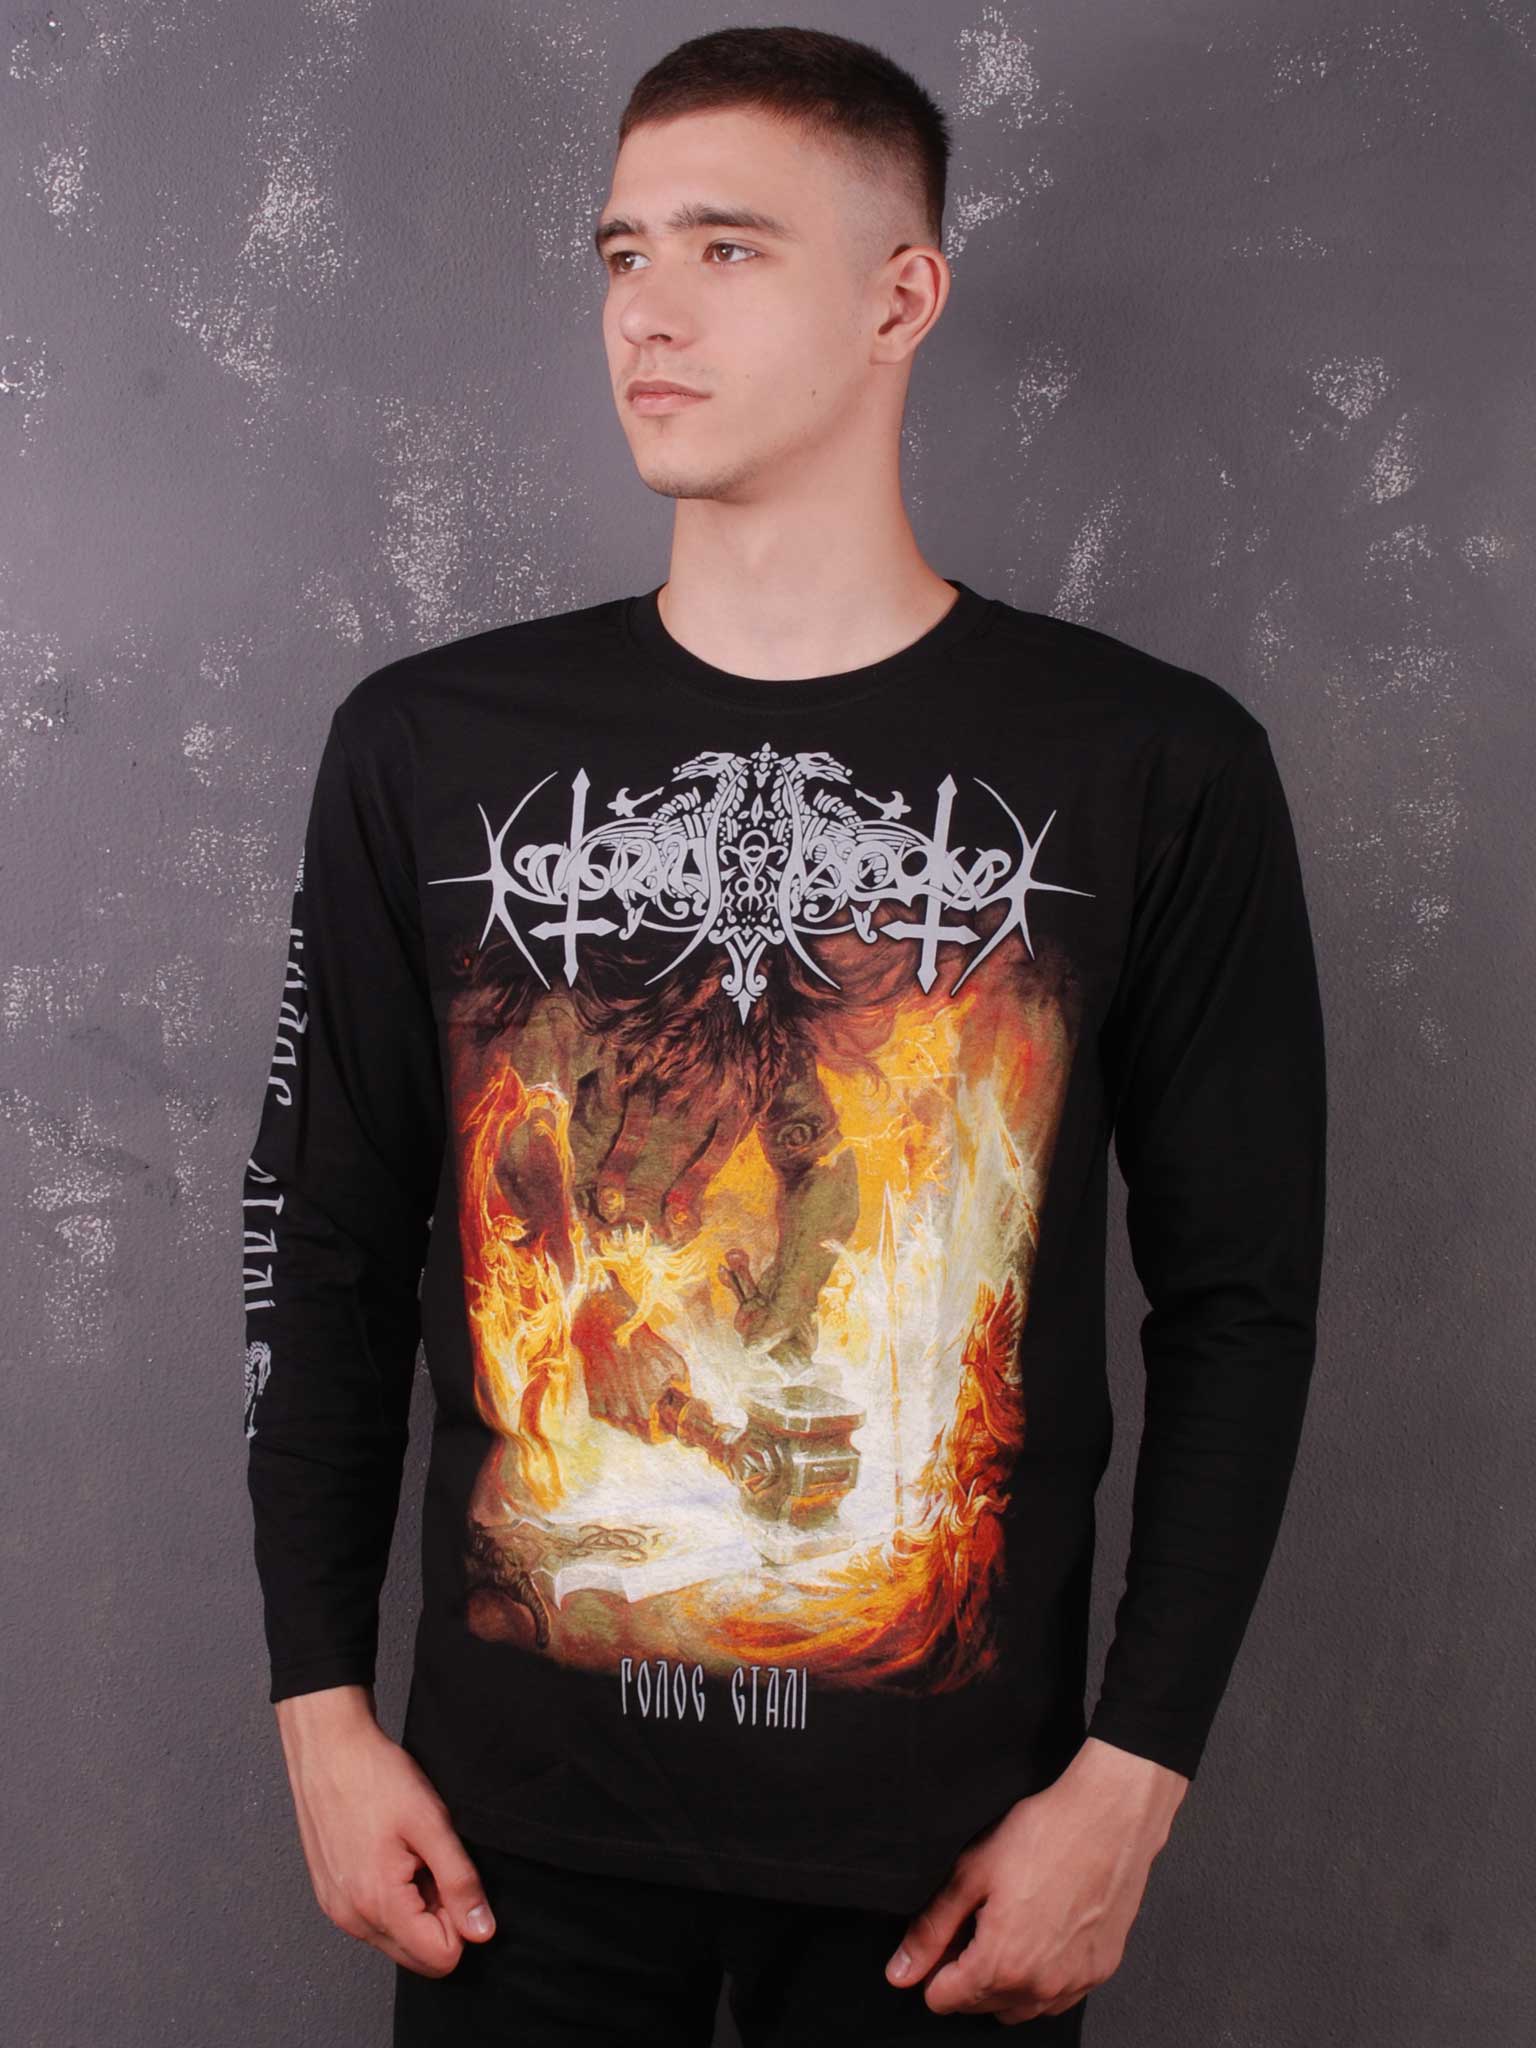 Nokturnal Mortum - Голос Сталі / The Voice Of Steel Album Cover 2015 (B&C) Long Sleeve